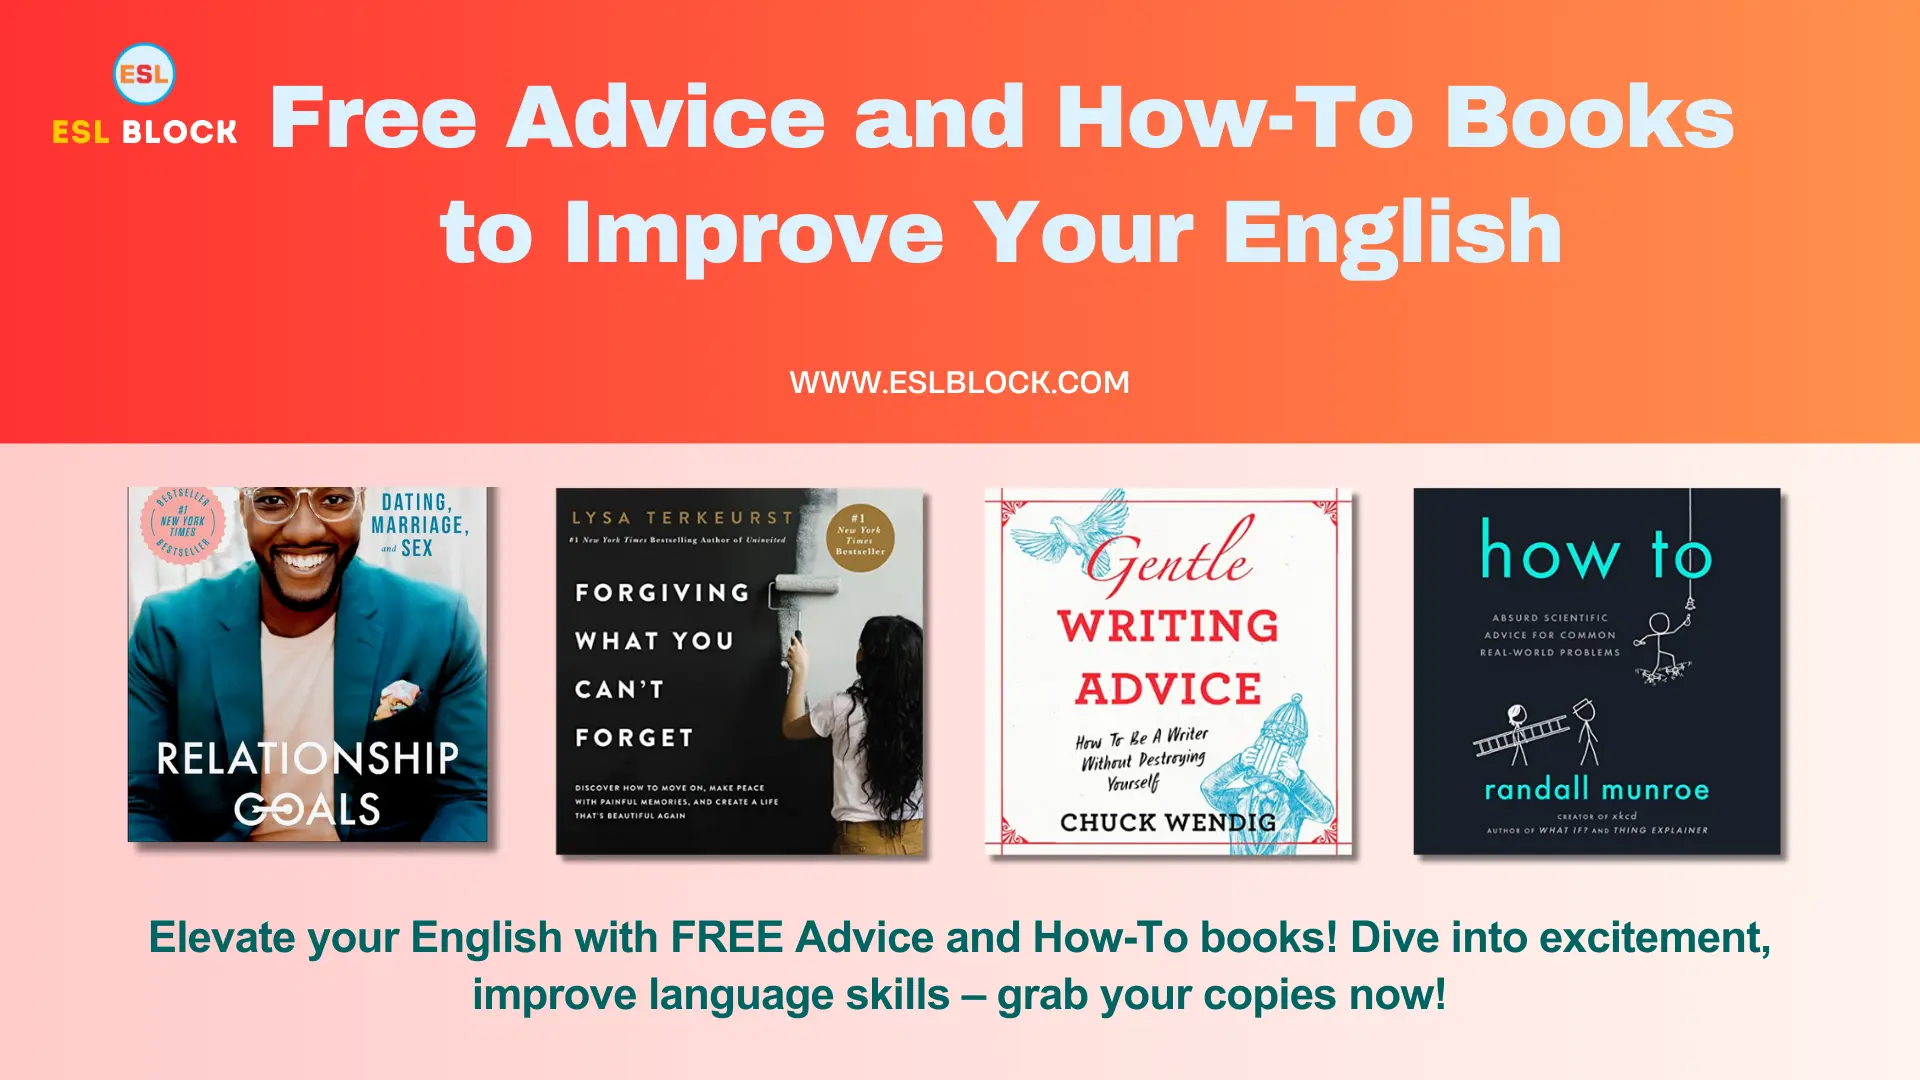 Free Advice and How-To Books to Improve Your English